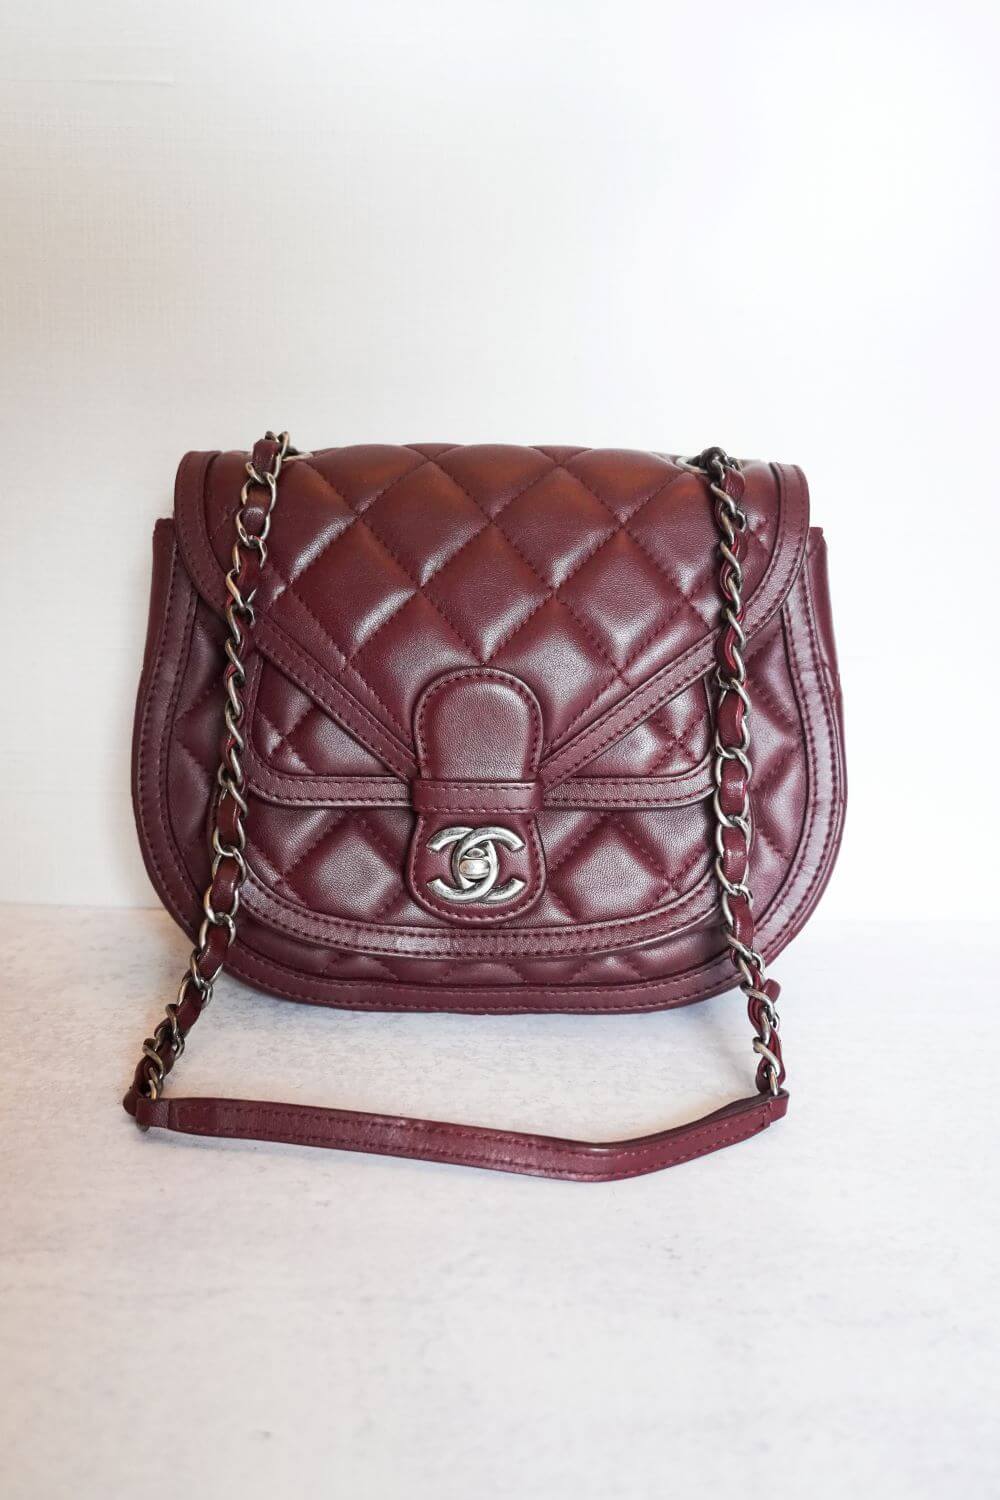 Chanel Burgundy Quilted Calfskin Classic Shopping Tote Silver